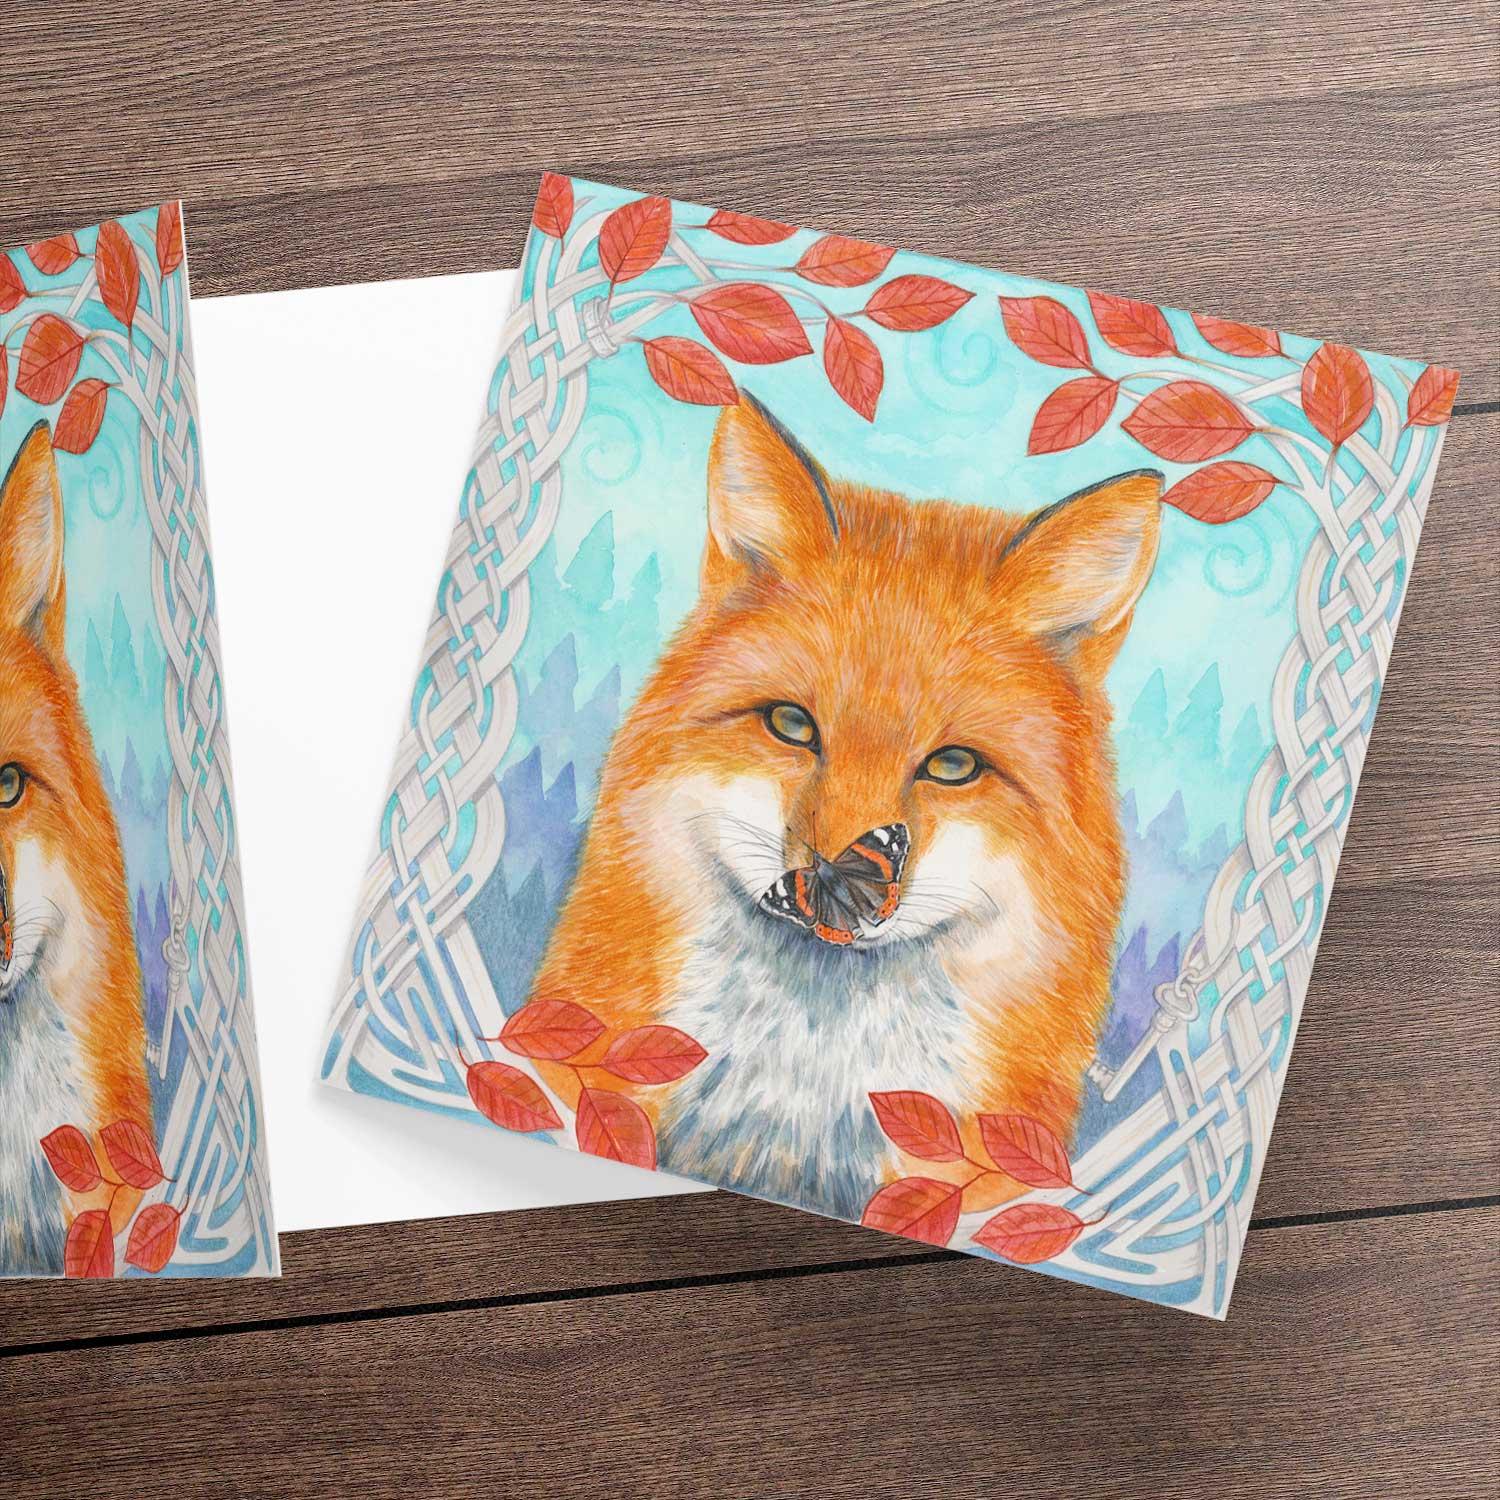 Fox Greeting Card from an original painting by artist Marjory Tait